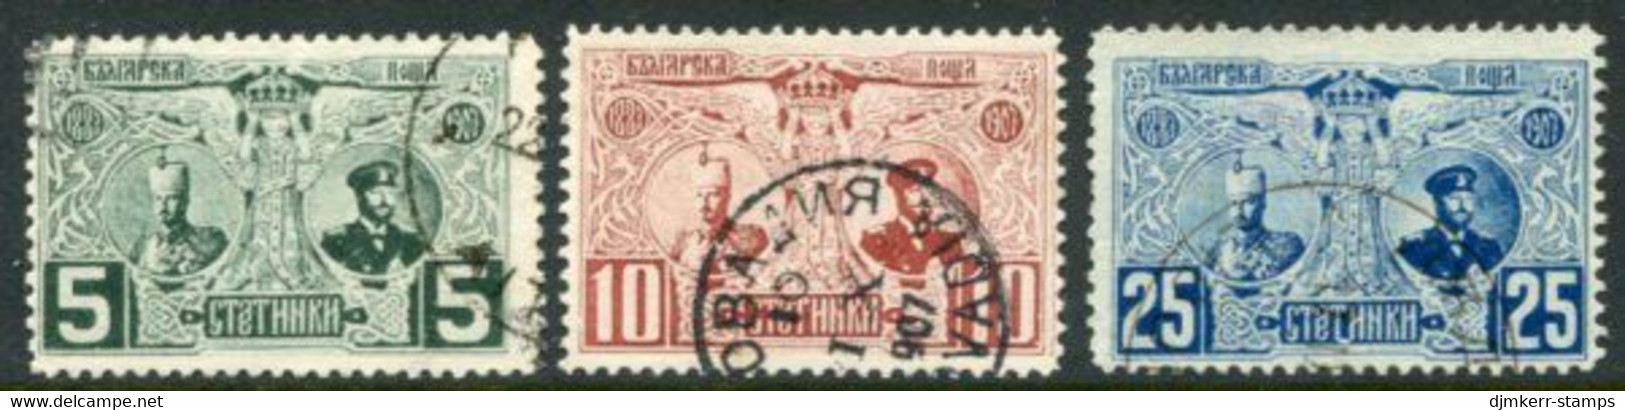 BULGARIA 1907 20th Anniversary Of Accession Used.  Michel 66-68 - Used Stamps